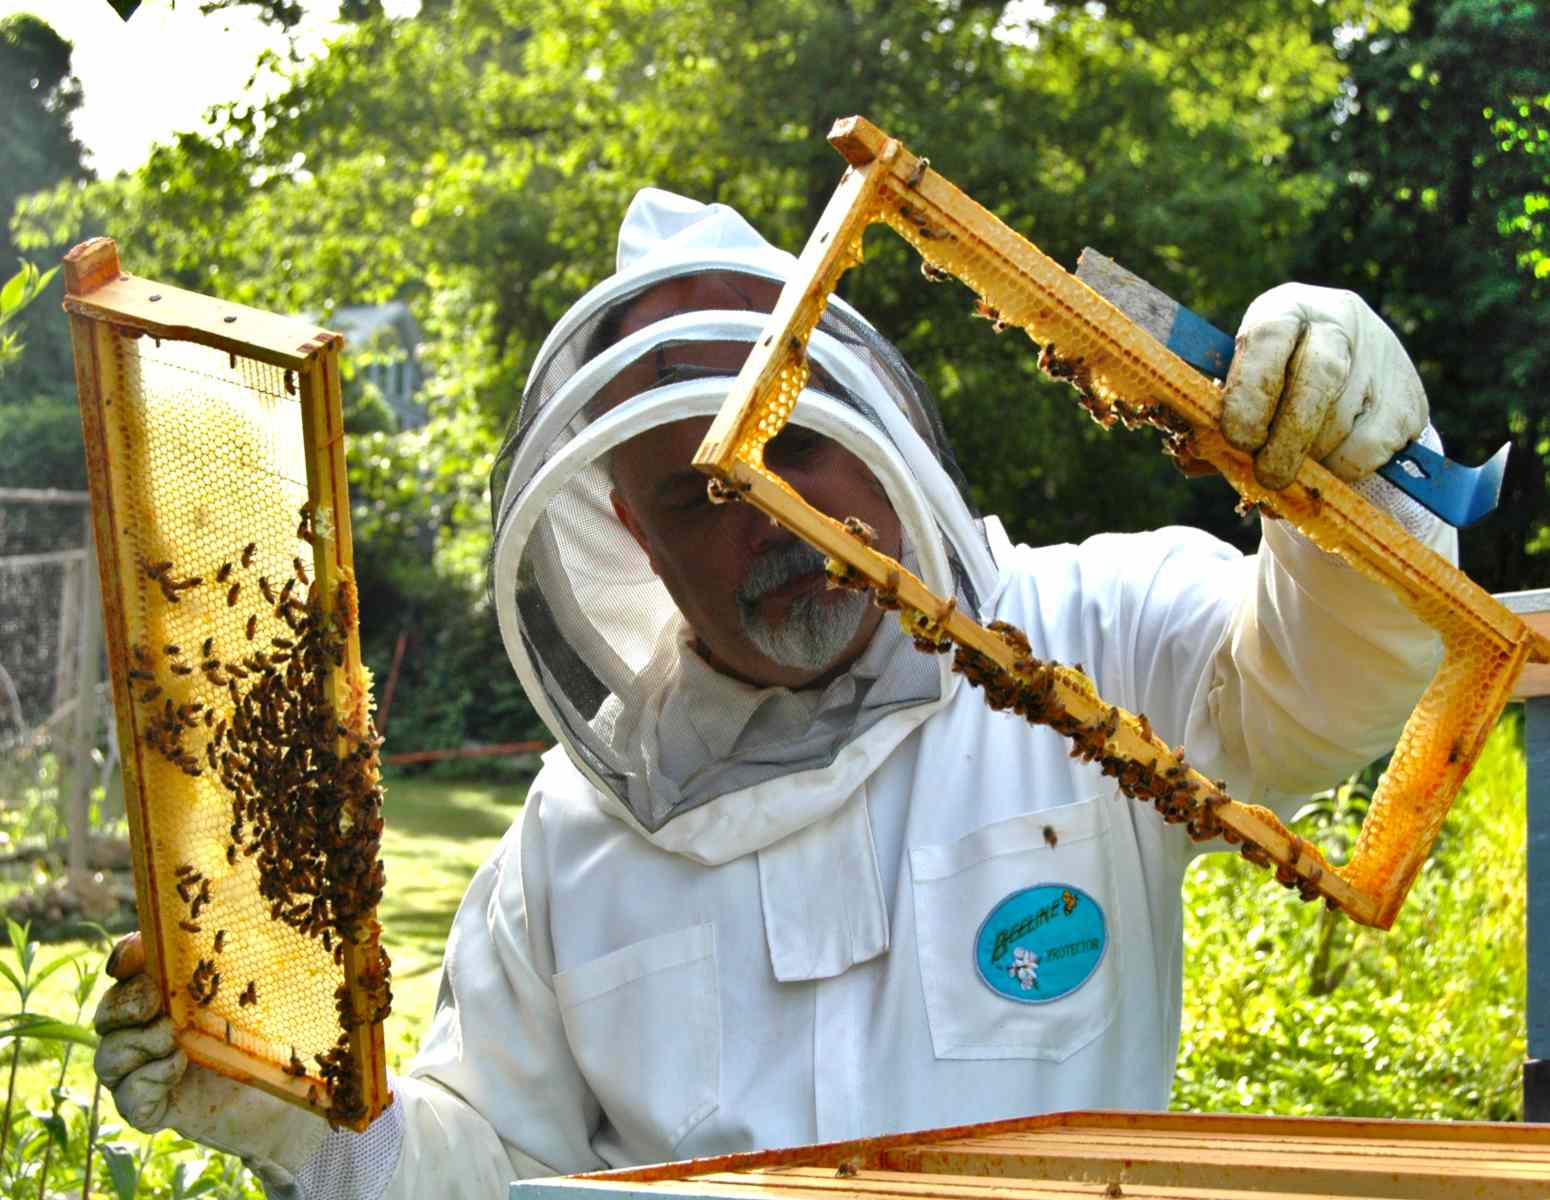 Beekeeper opening a hive